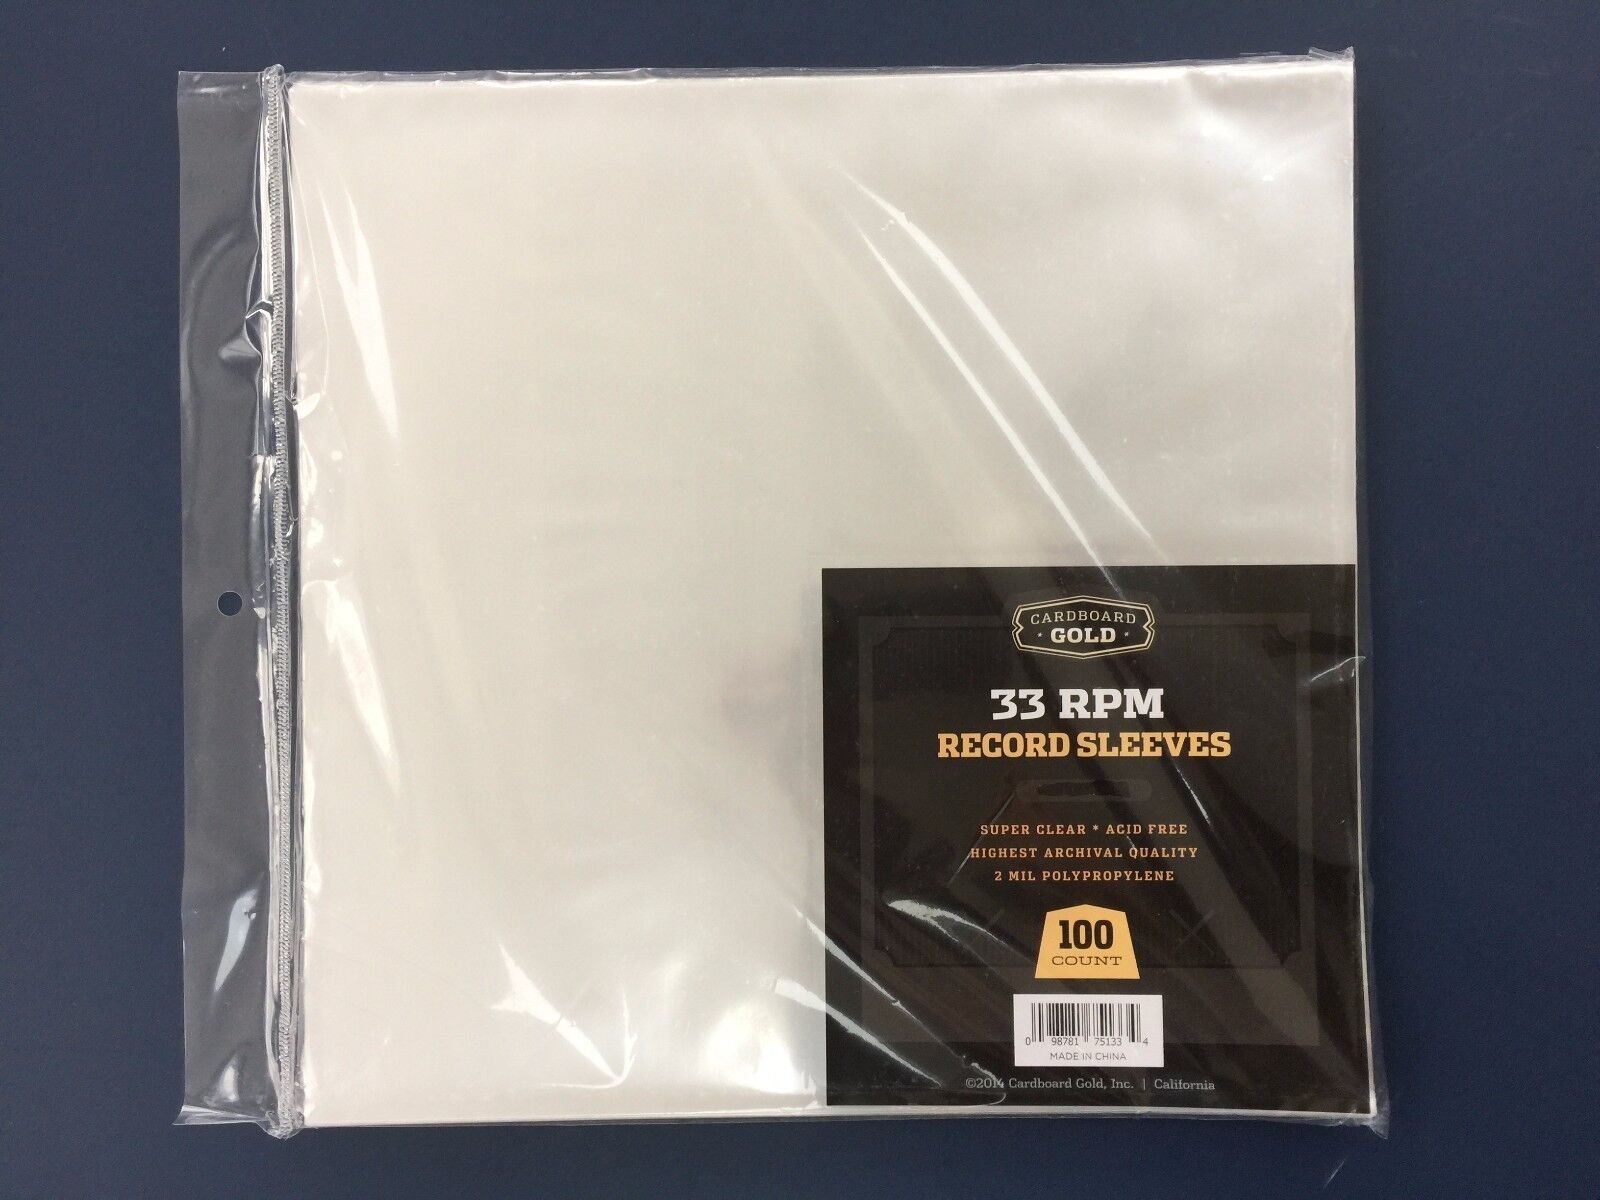 100 Clear Poly Plastic LP Outer Sleeves 2 Mil 12" Vinyl 33rpm Record Album Cover Card Board Gold 33 RPM RECORD SLEEVES